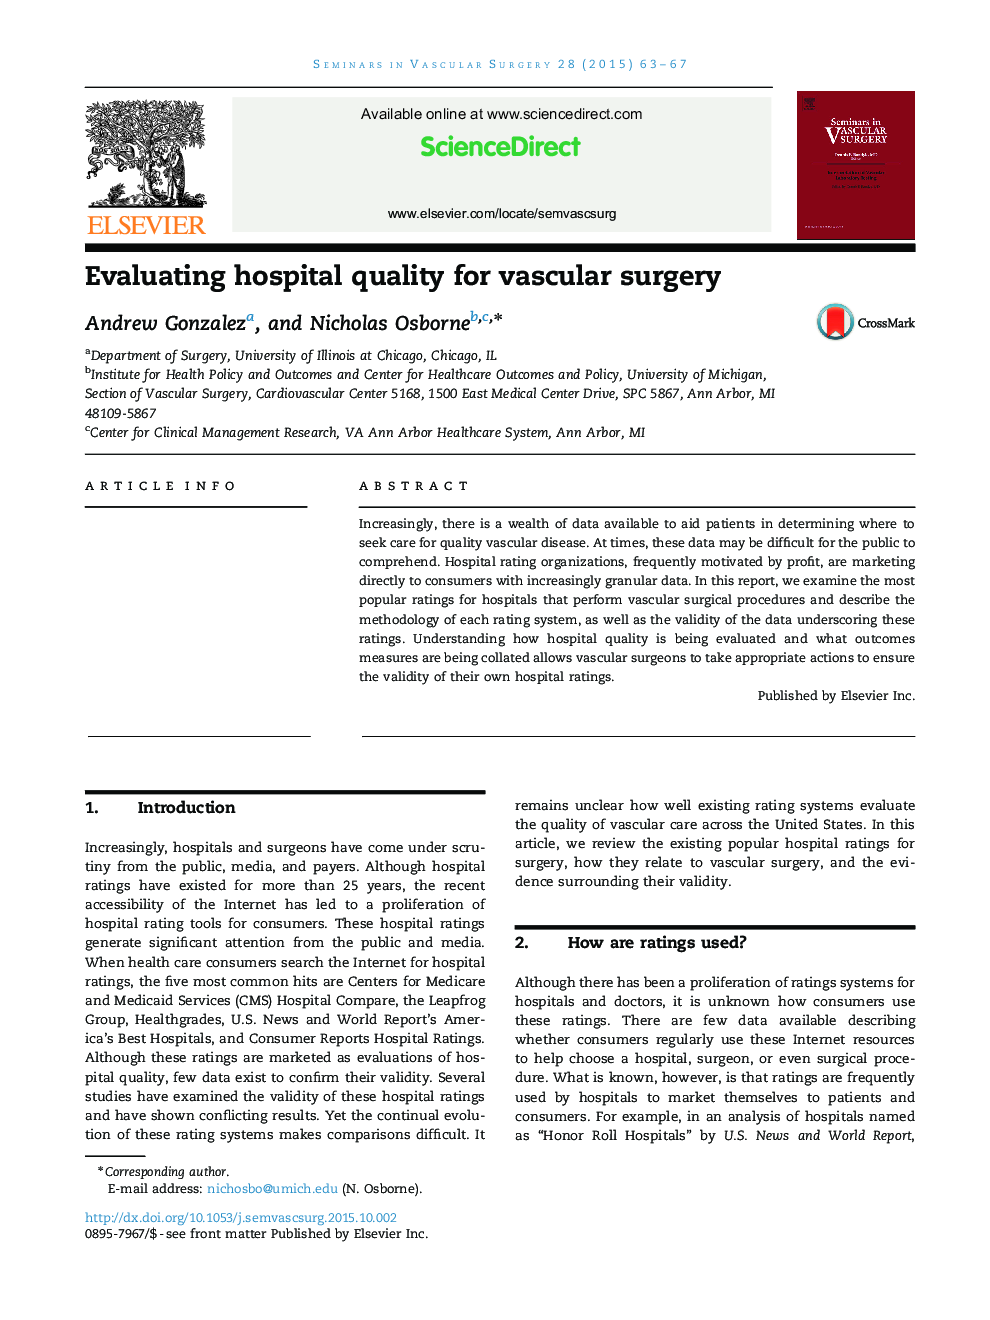 Evaluating hospital quality for vascular surgery